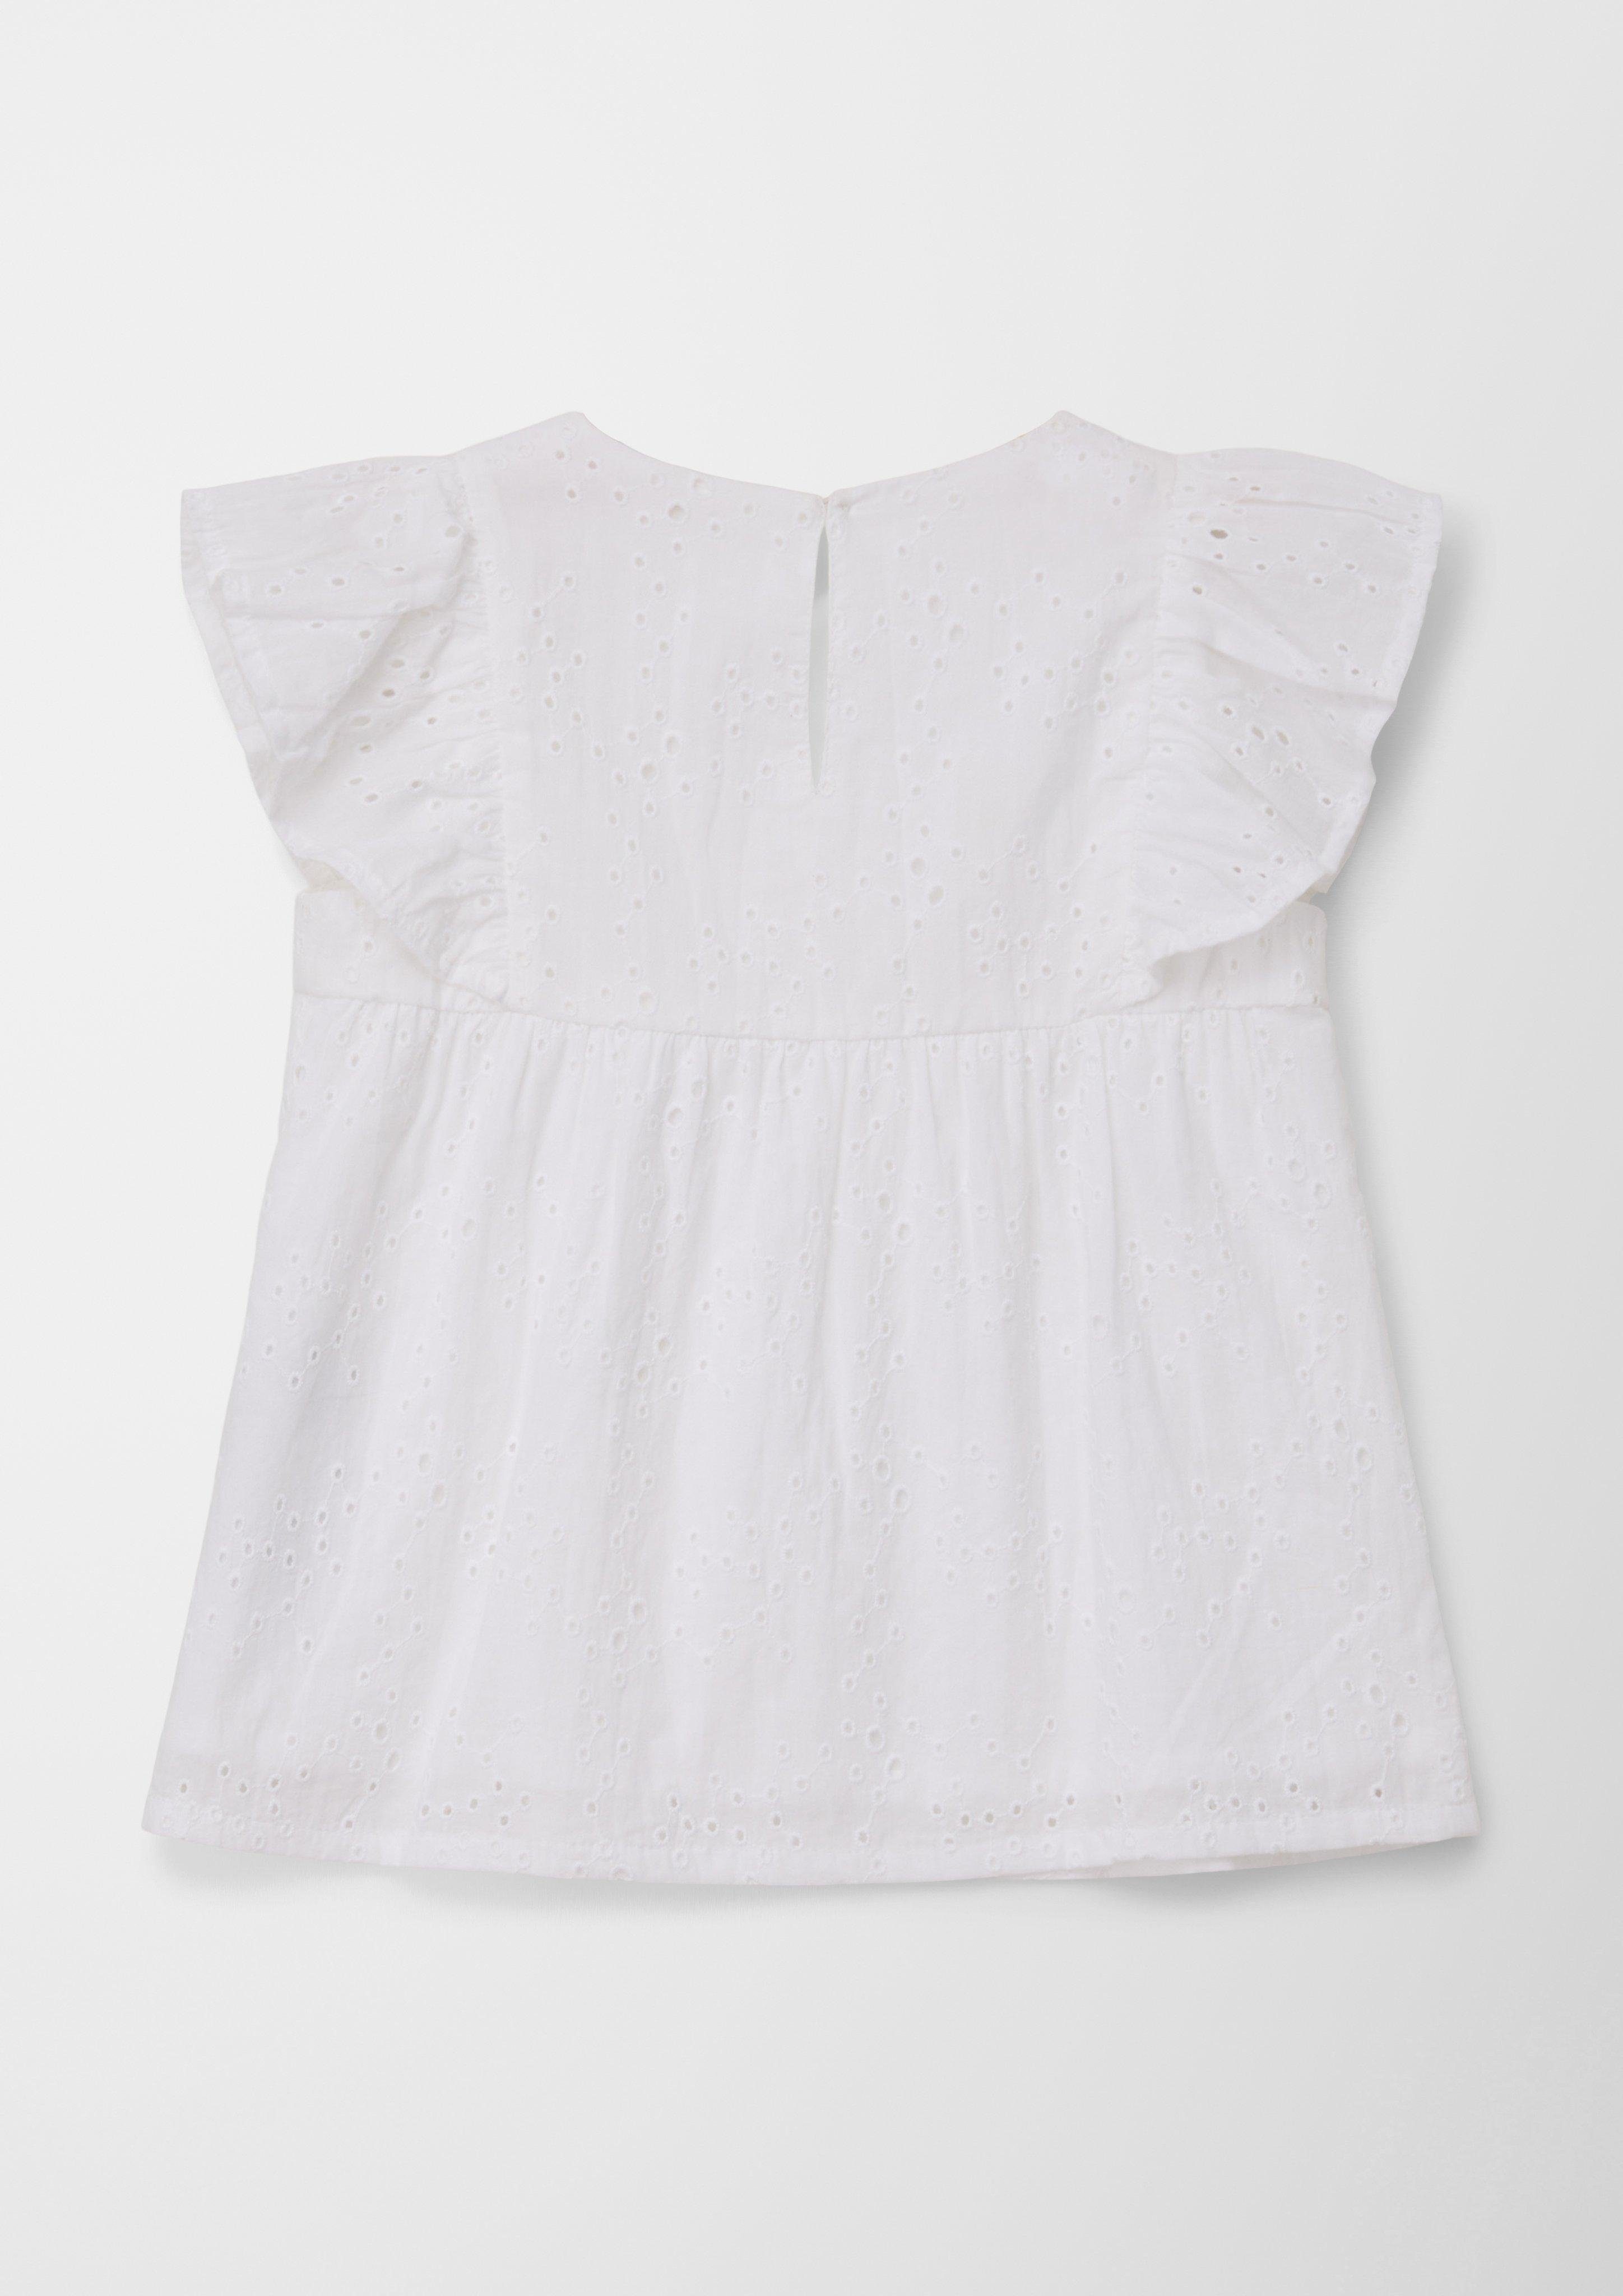 Raffung Bluse Kurzarmbluse s.Oliver Broderie Anglaise aus